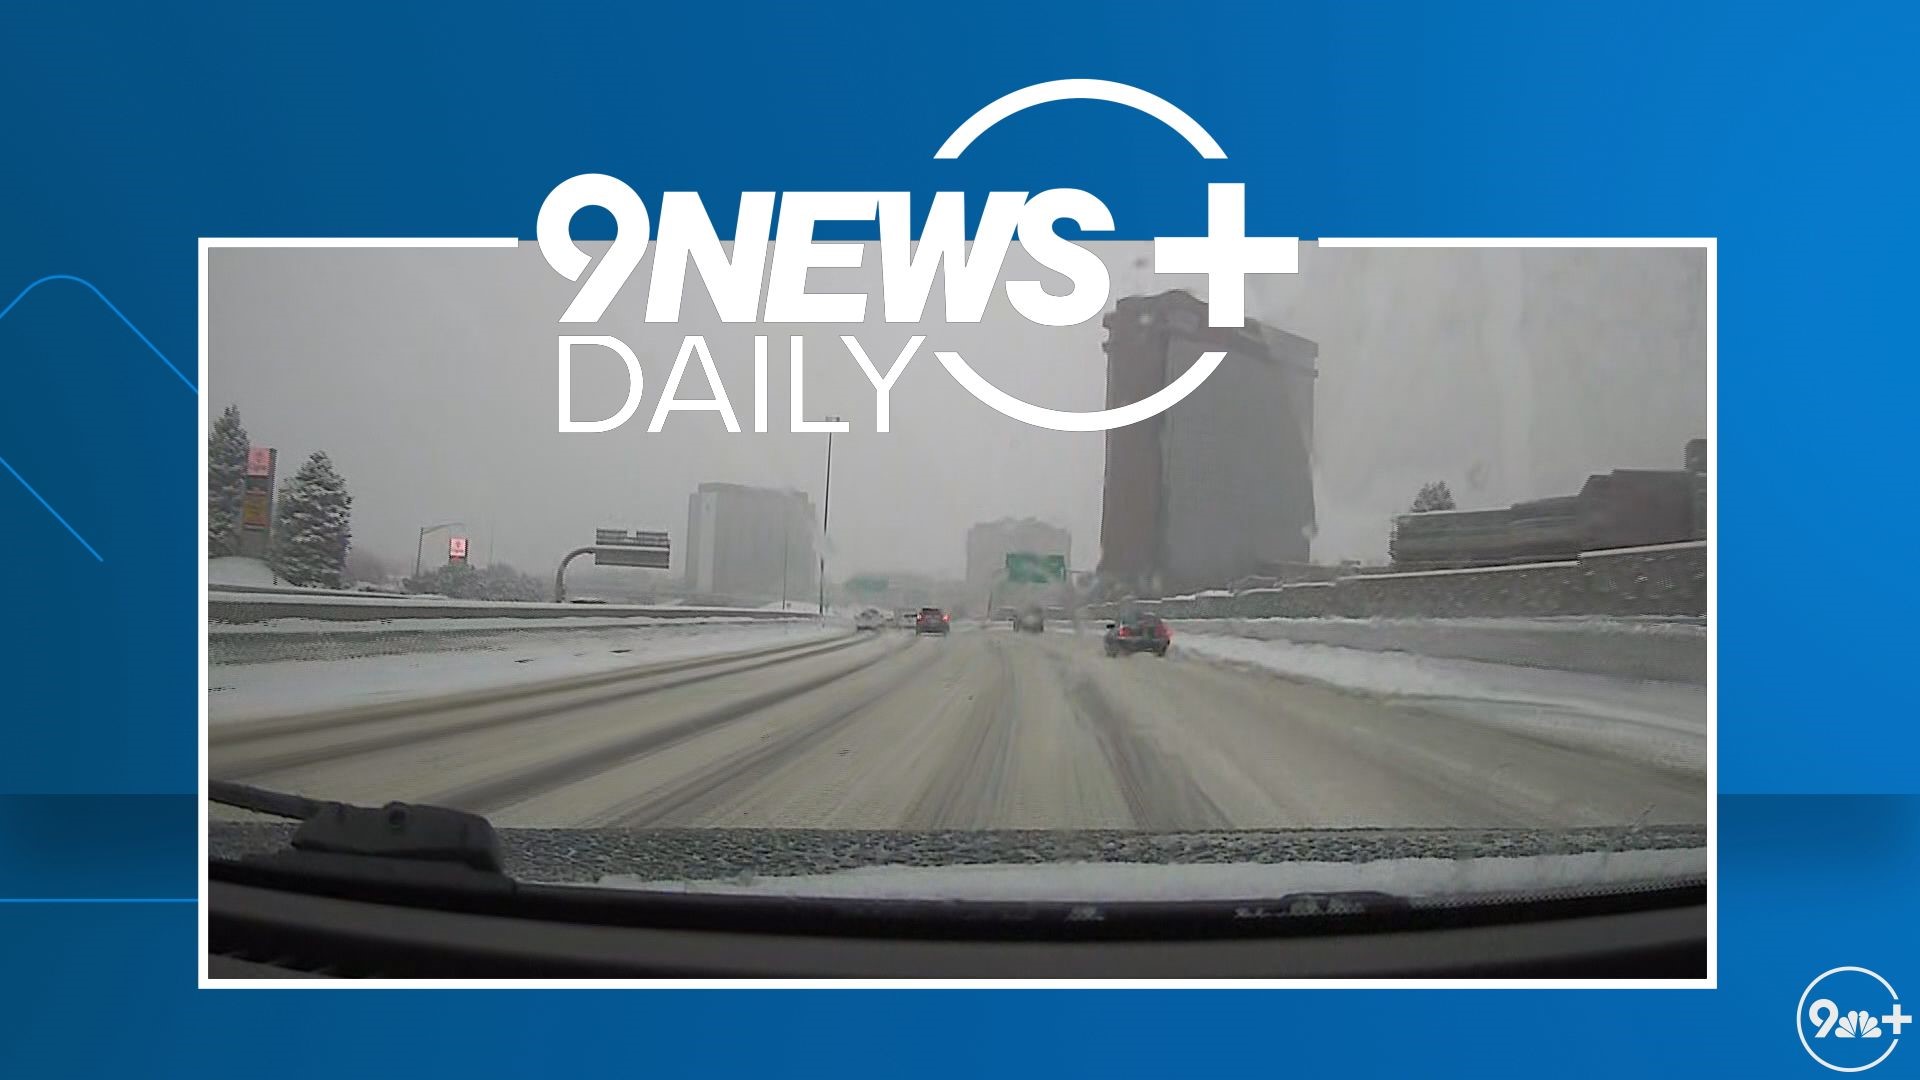 Meteorologist Chris Bianchi breaks down the first snowstorm of the season for the Front Range, where anywhere from 3 to 12 inches of fresh snow fell over the weekend